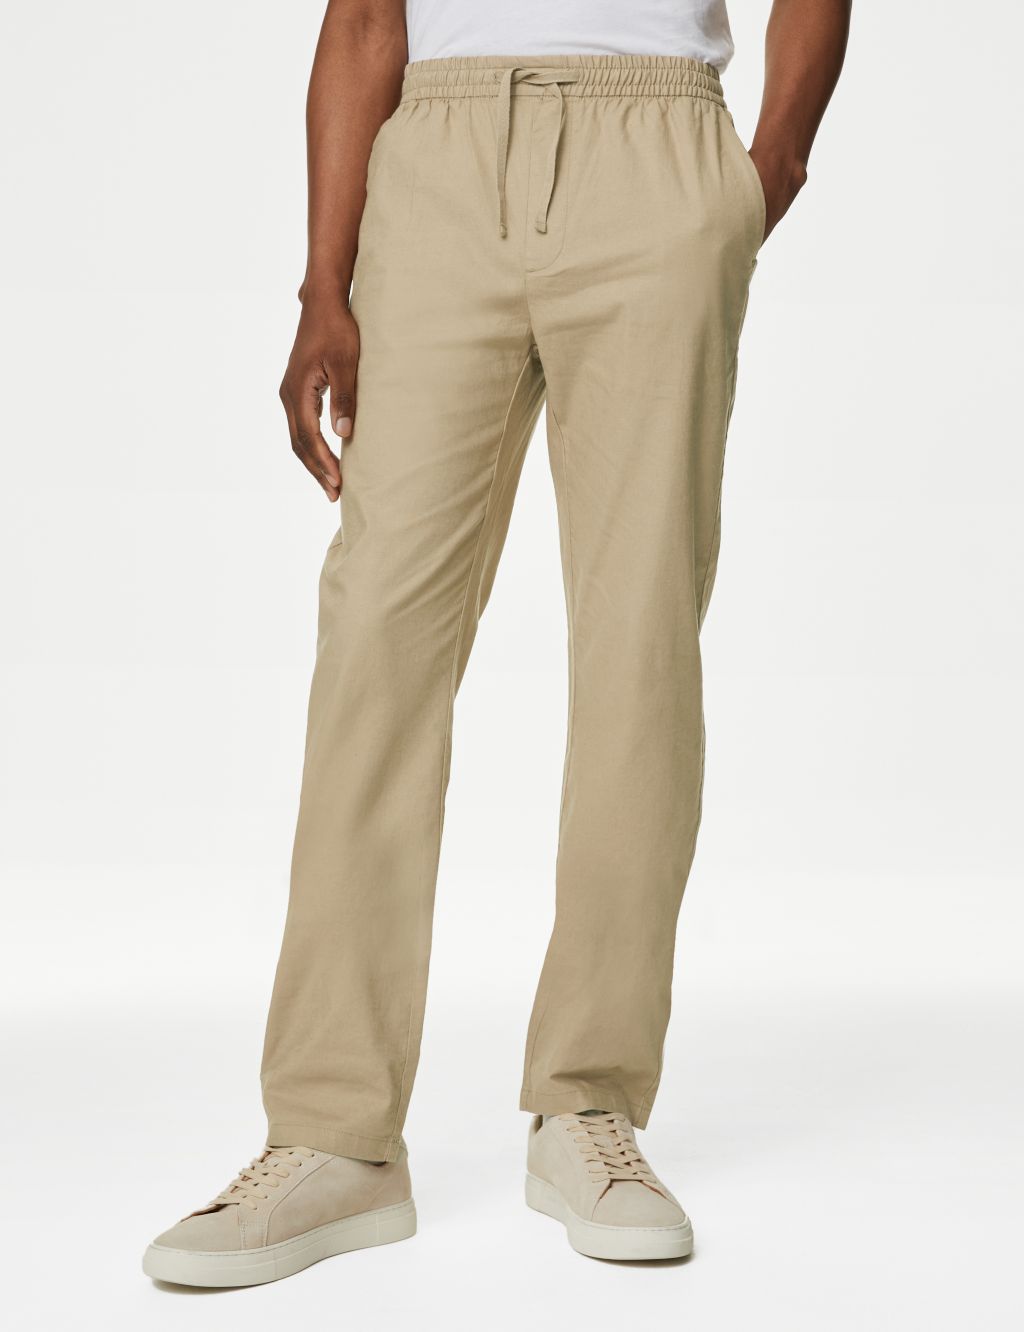 Hat and Beyond Mens Casual Twill Jogger Pants Harem Elastic Stretch Chinos  (X-Large, Khaki) at  Men's Clothing store